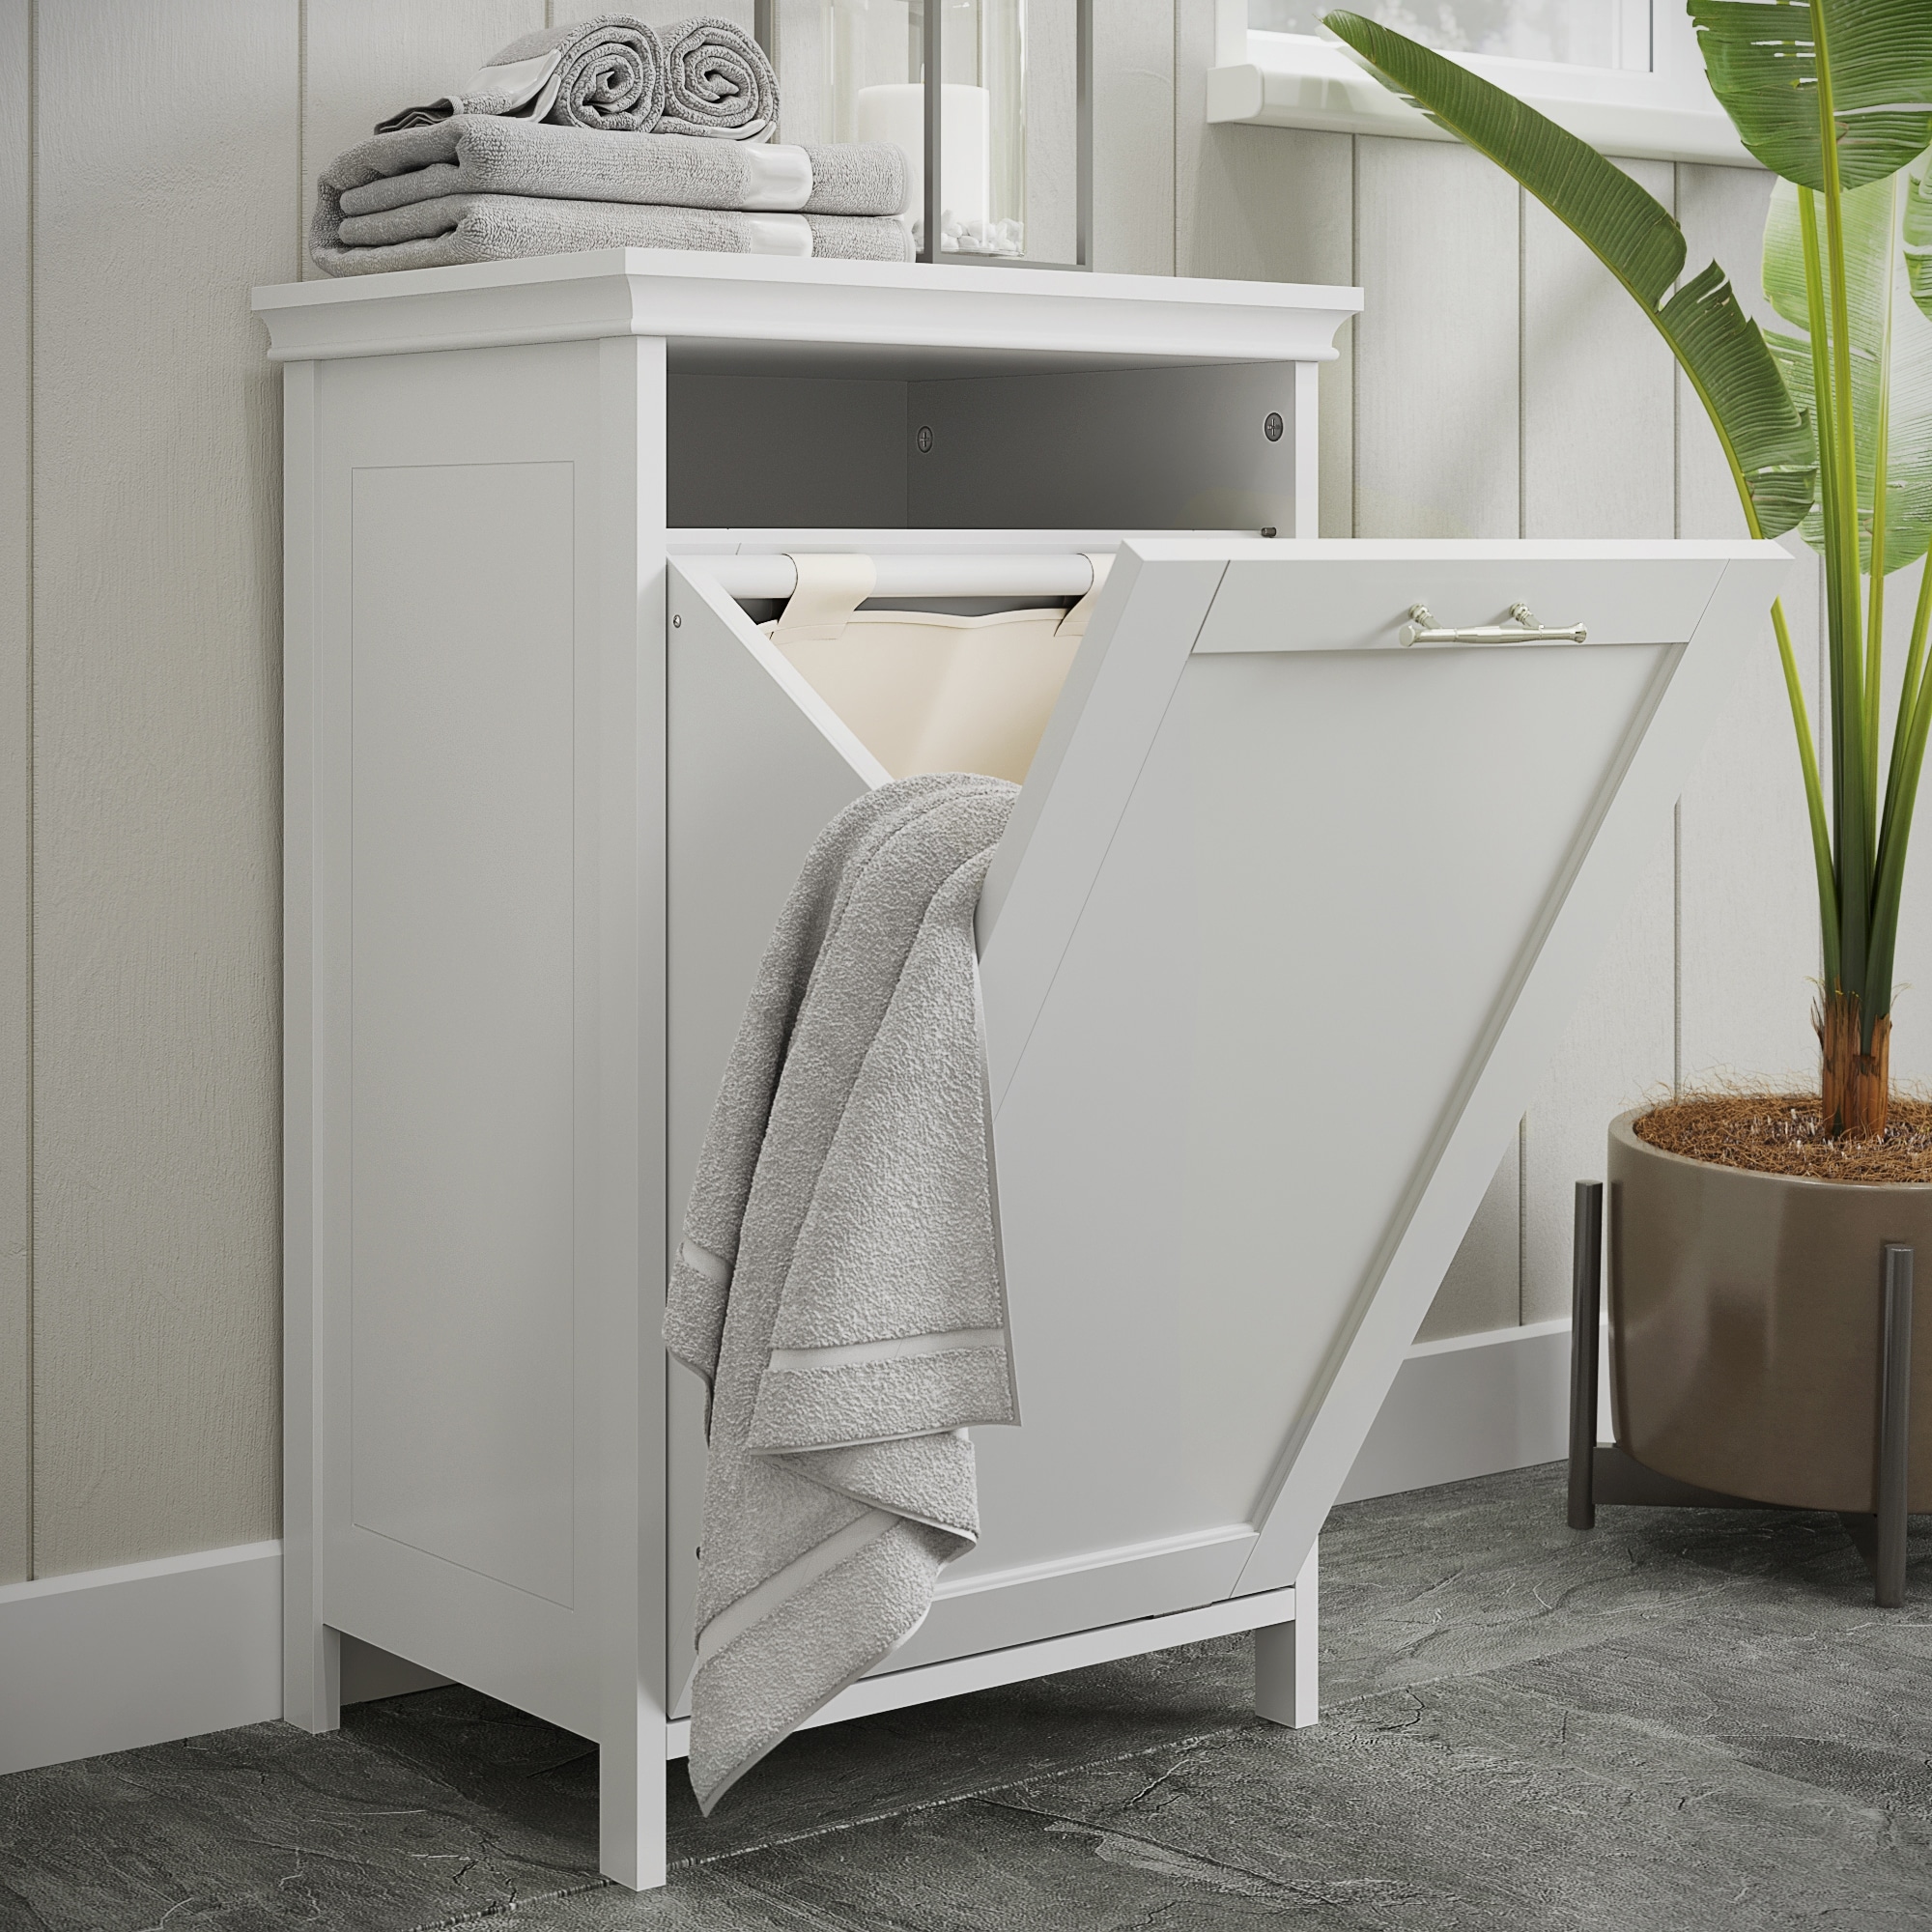 https://ak1.ostkcdn.com/images/products/is/images/direct/0243102f7e0ccdbbd877bfa59df0b3d8103b68f4/Somerset-Tilt-Out-Laundry-Hamper%2C-White.jpg